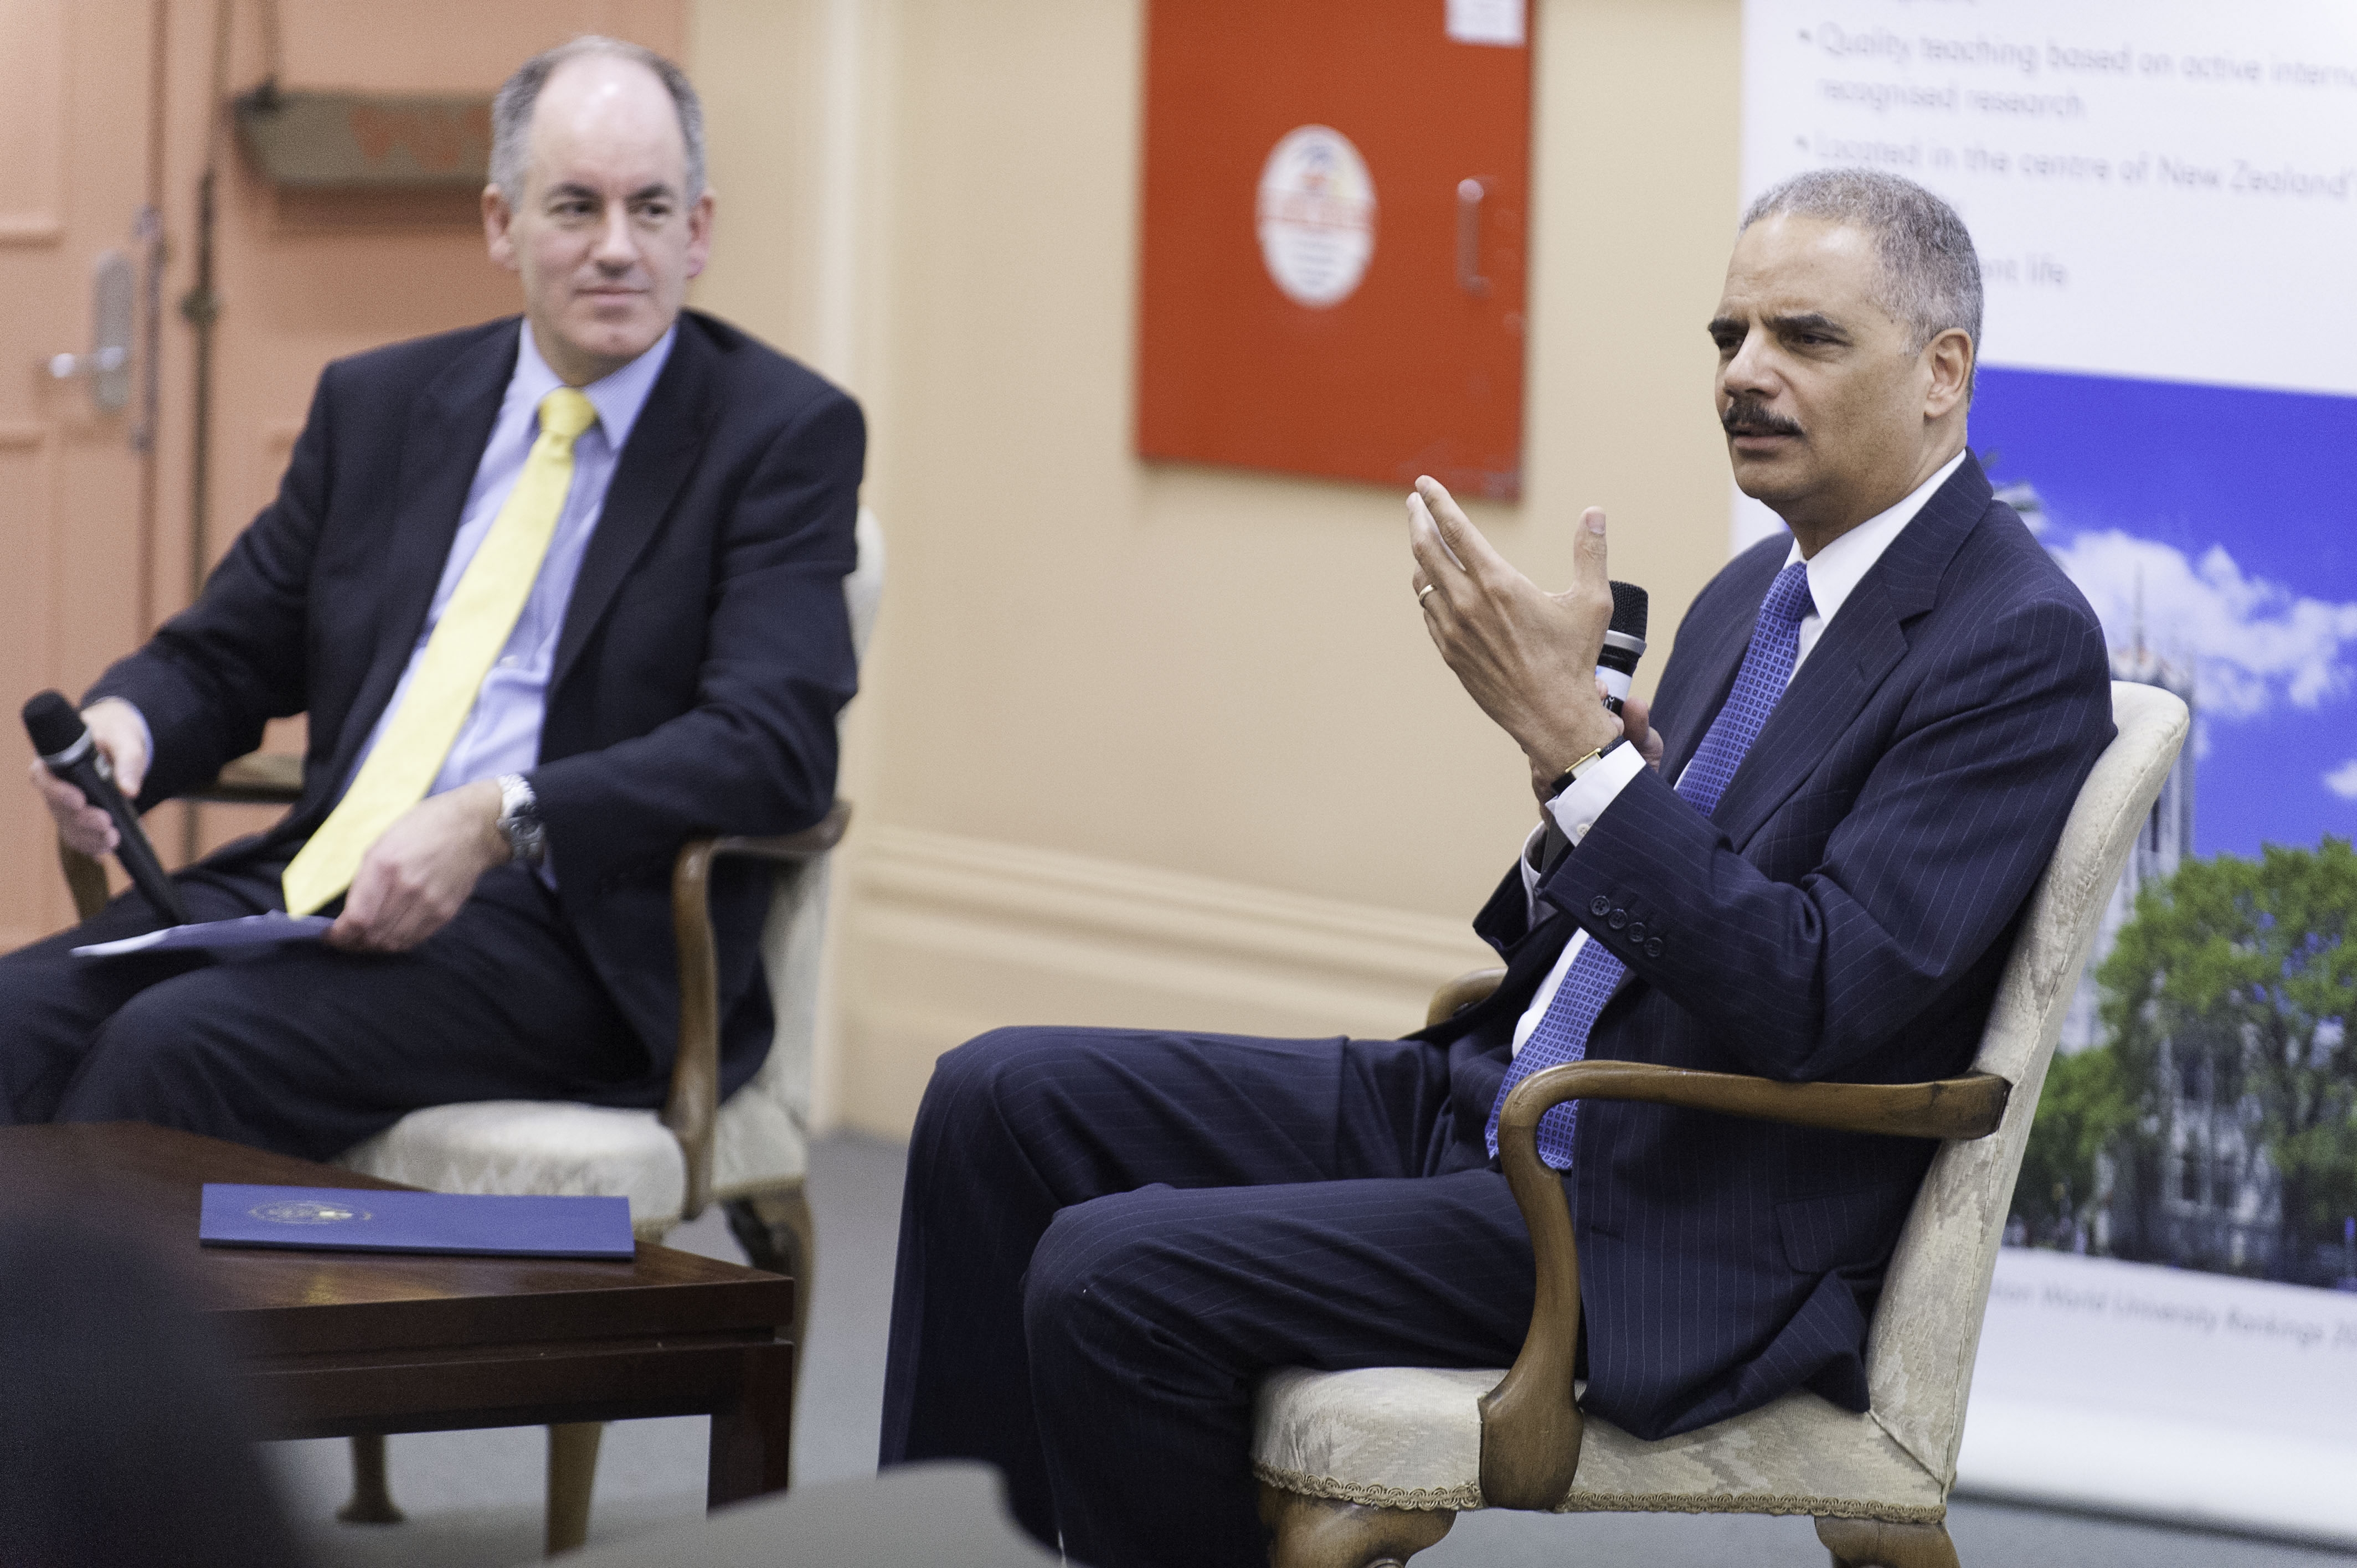 Attorney General Holder takes questions from University of Auckland School of Law students.